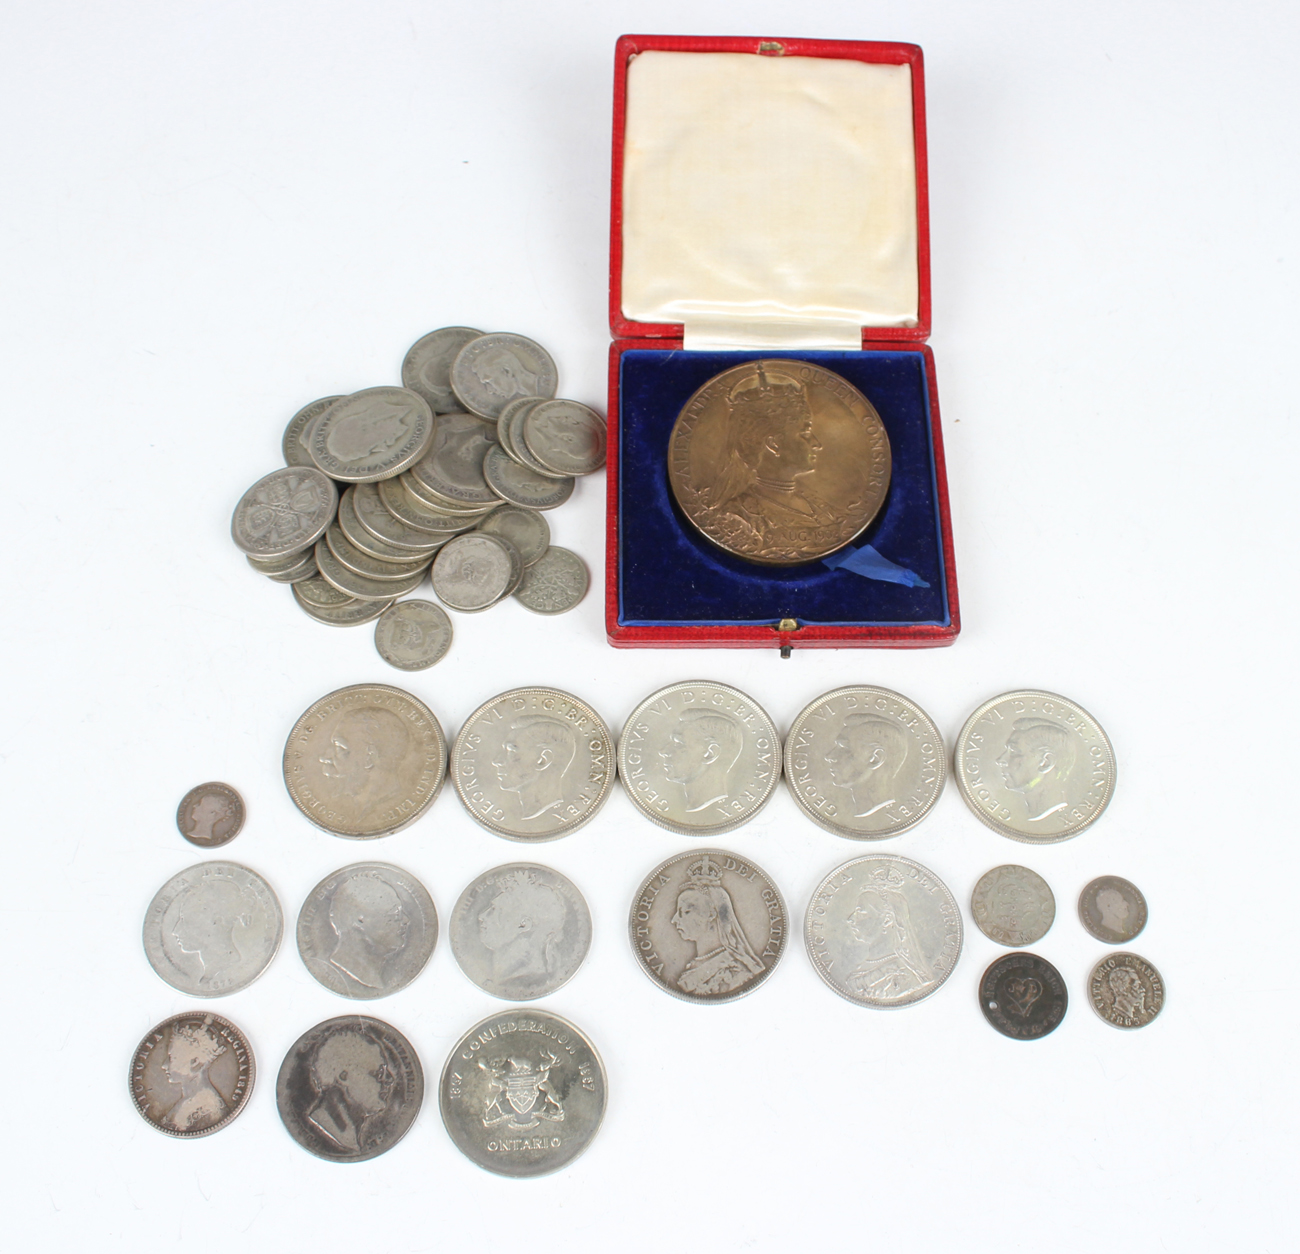 A collection of 19th and 20th century British silver and silver nickel coinage, including a group of